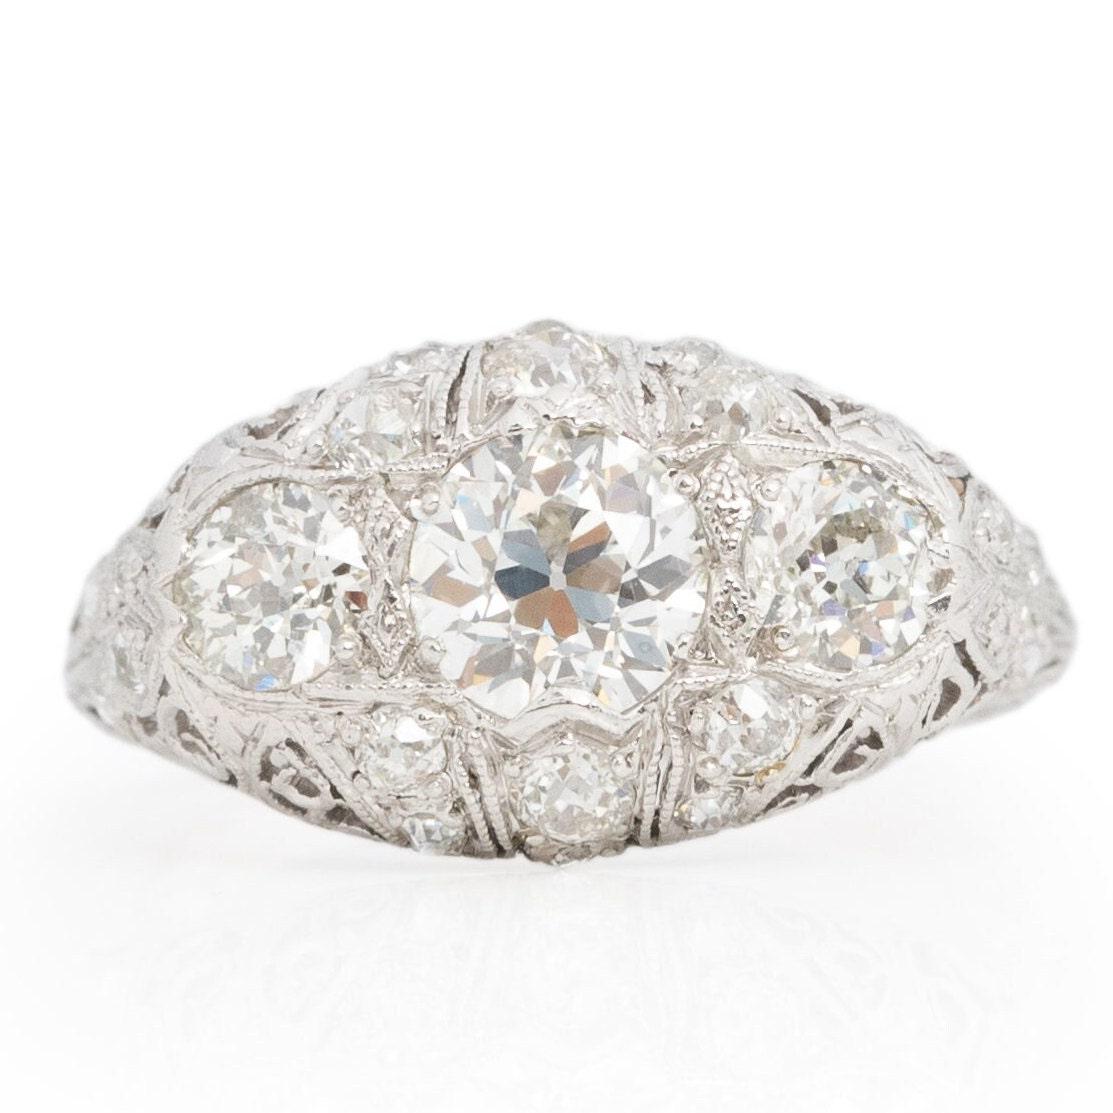 Presenting an exquisite Art Deco masterpiece, meticulously crafted in platinum. This three-stone ring boasts exceptional filigree intricacies, with lace-like patterns delicately embracing the diamonds, creating an ethereal effect. At its heart lies